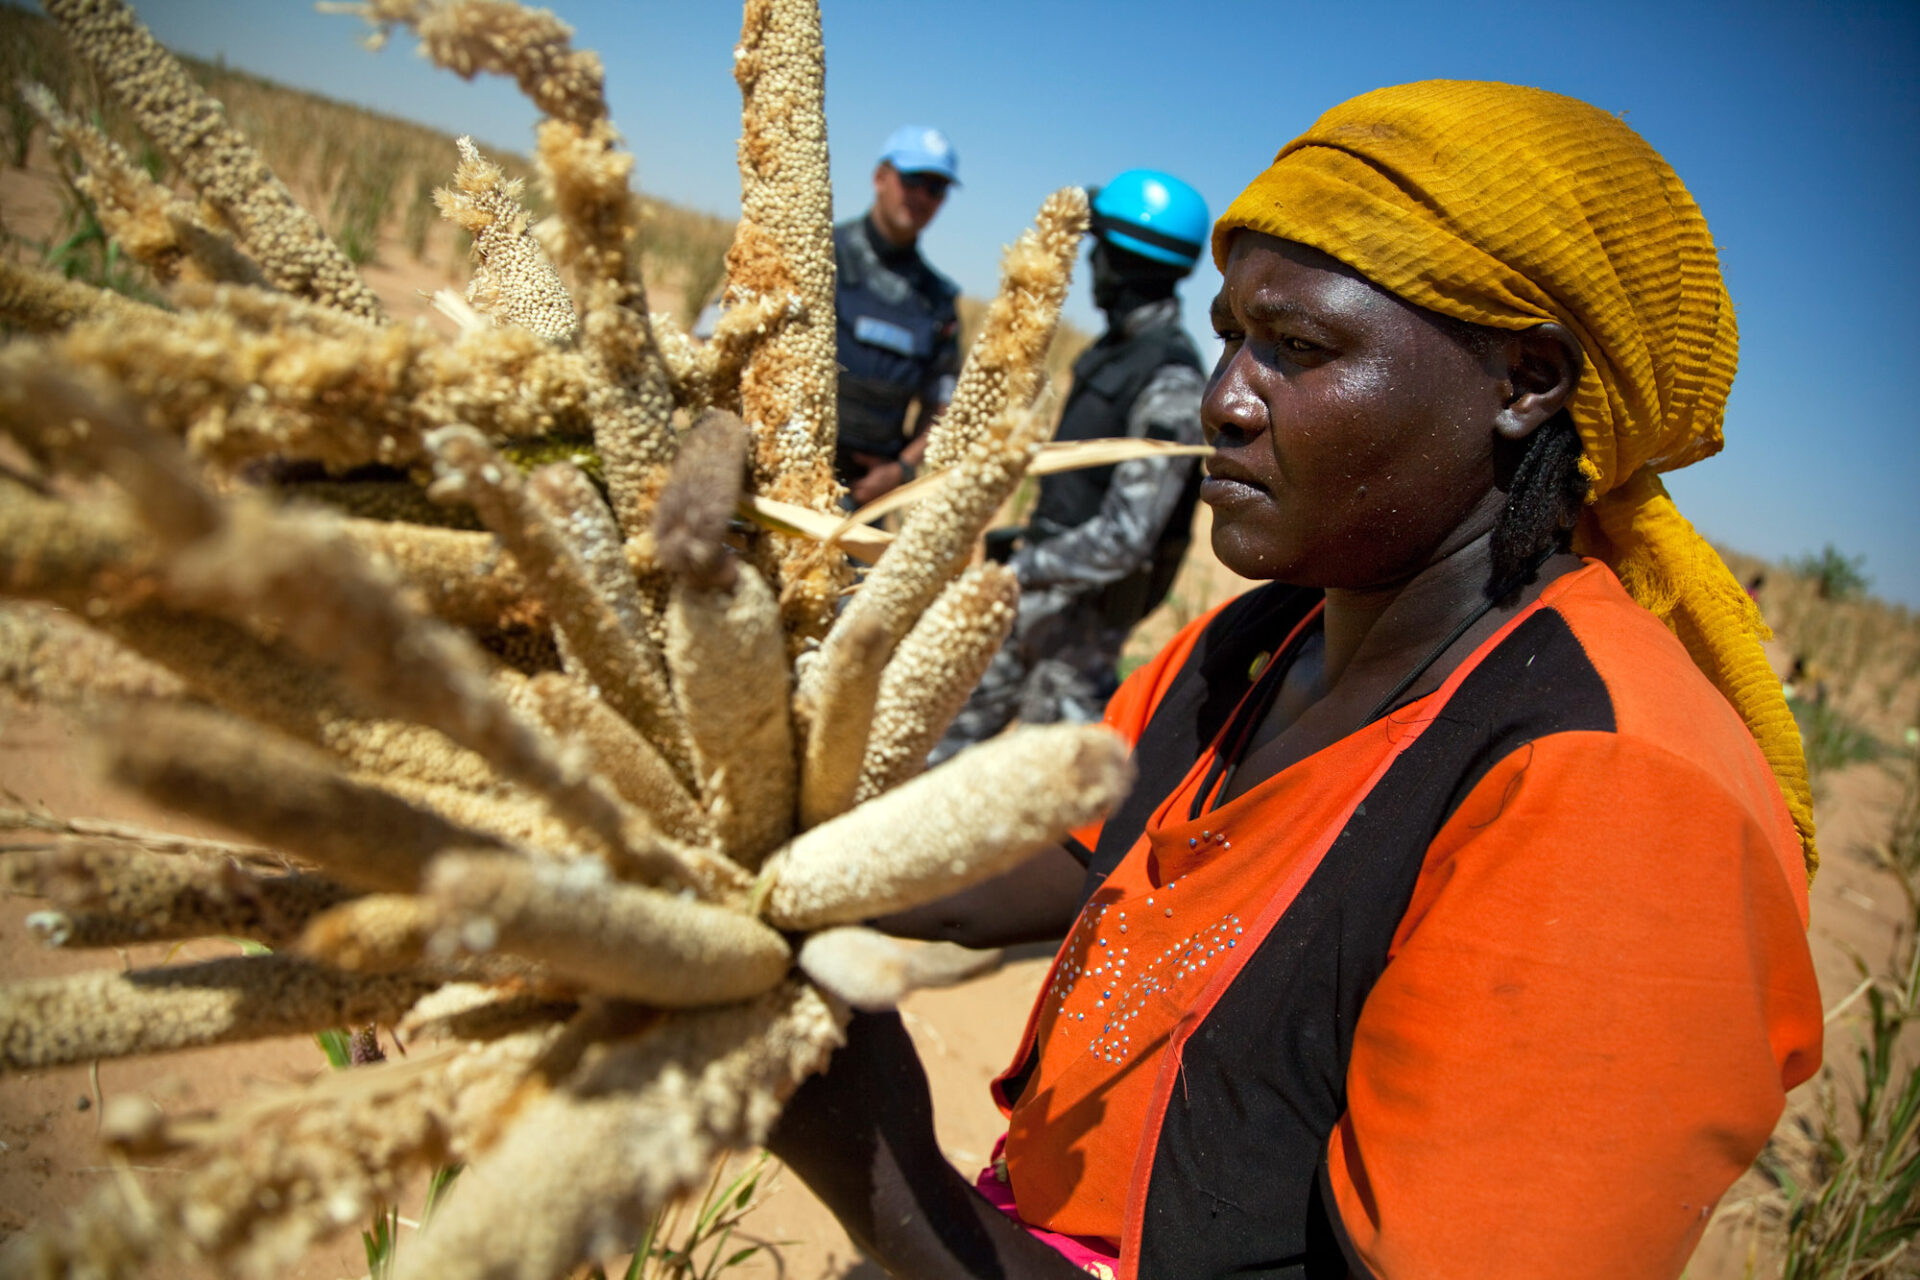 Woman collects millet in Saluma Area, Jordan, escorted by peacekeepers